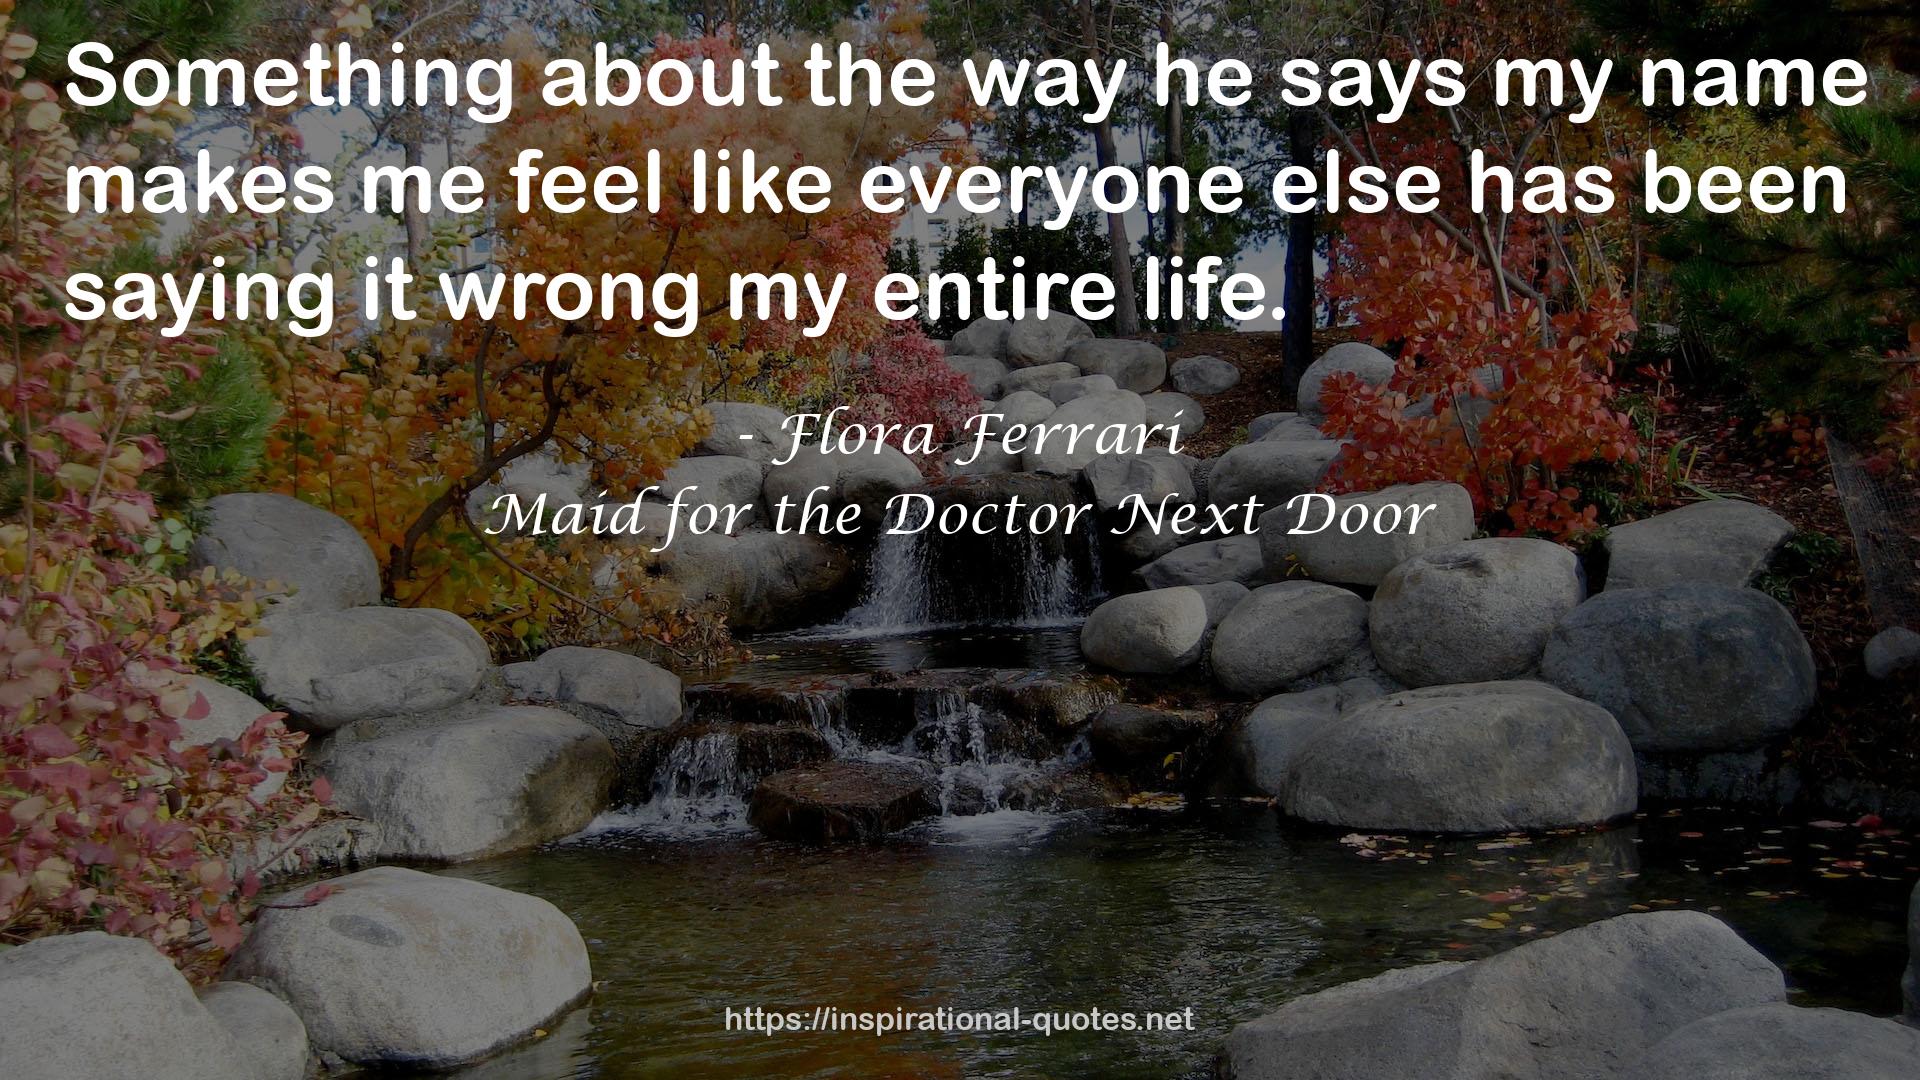 Maid for the Doctor Next Door QUOTES